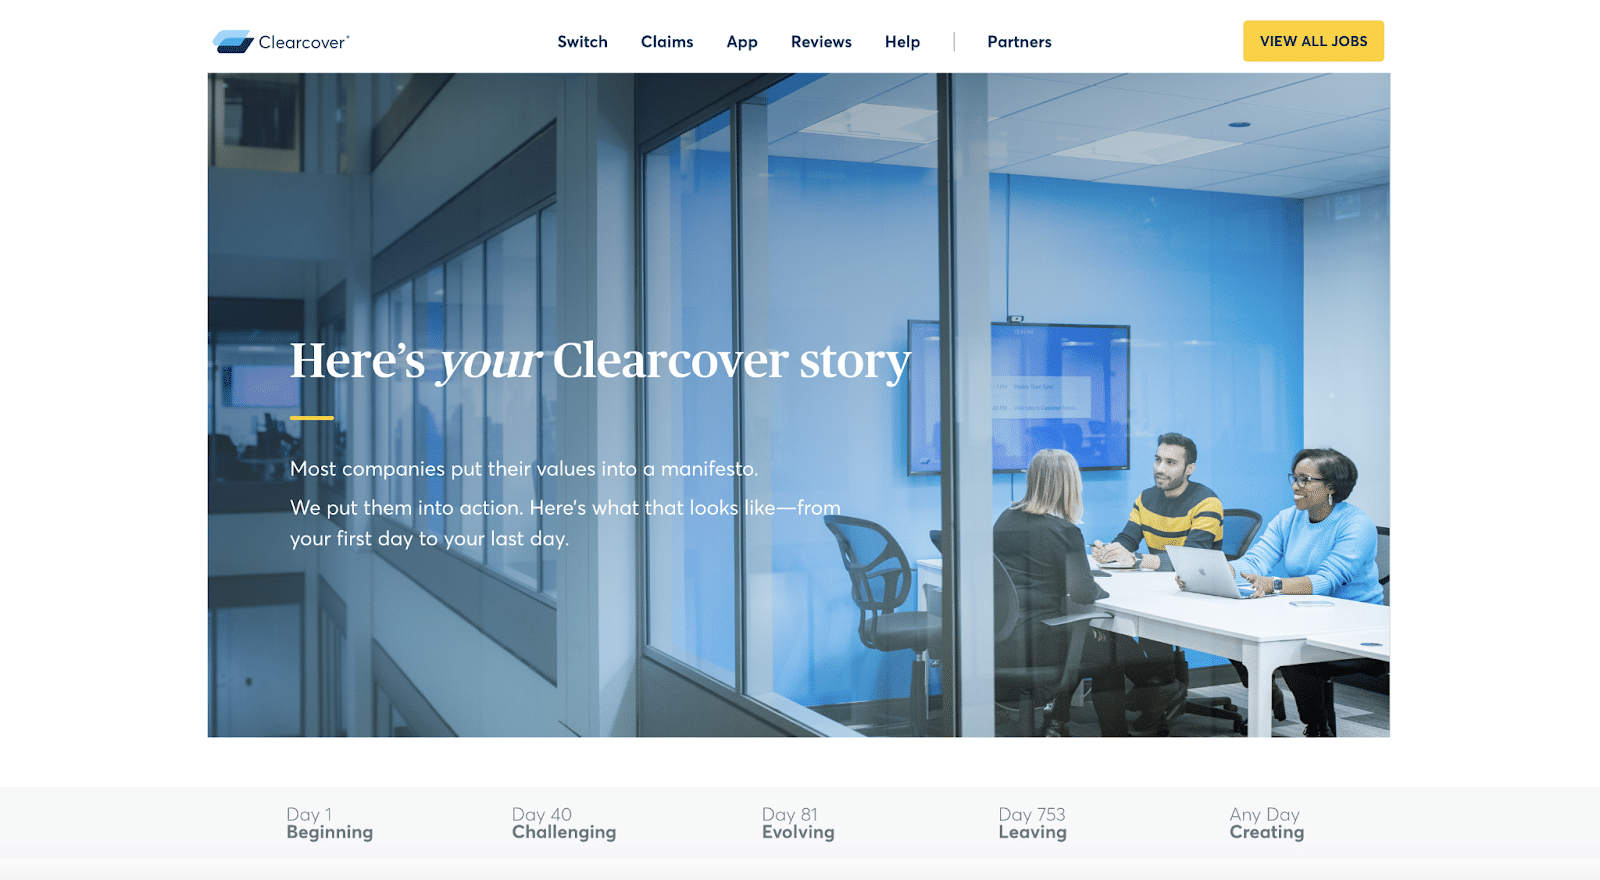 Clearcover invites new employees to chart their own stories.